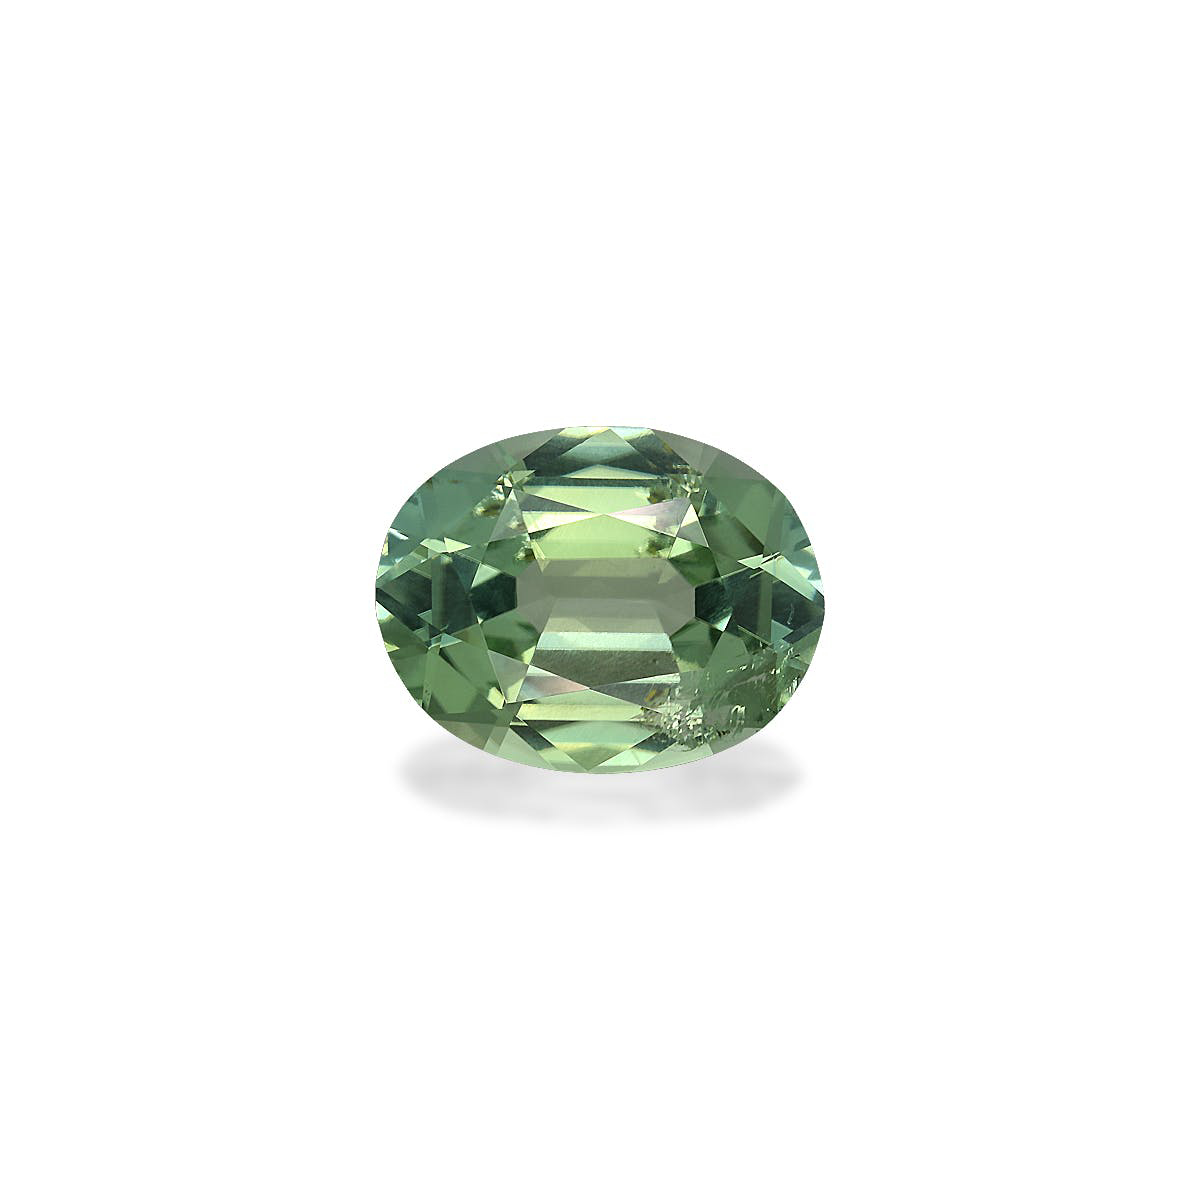 Picture of Cotton Green Tourmaline 3.97ct (TG1428)